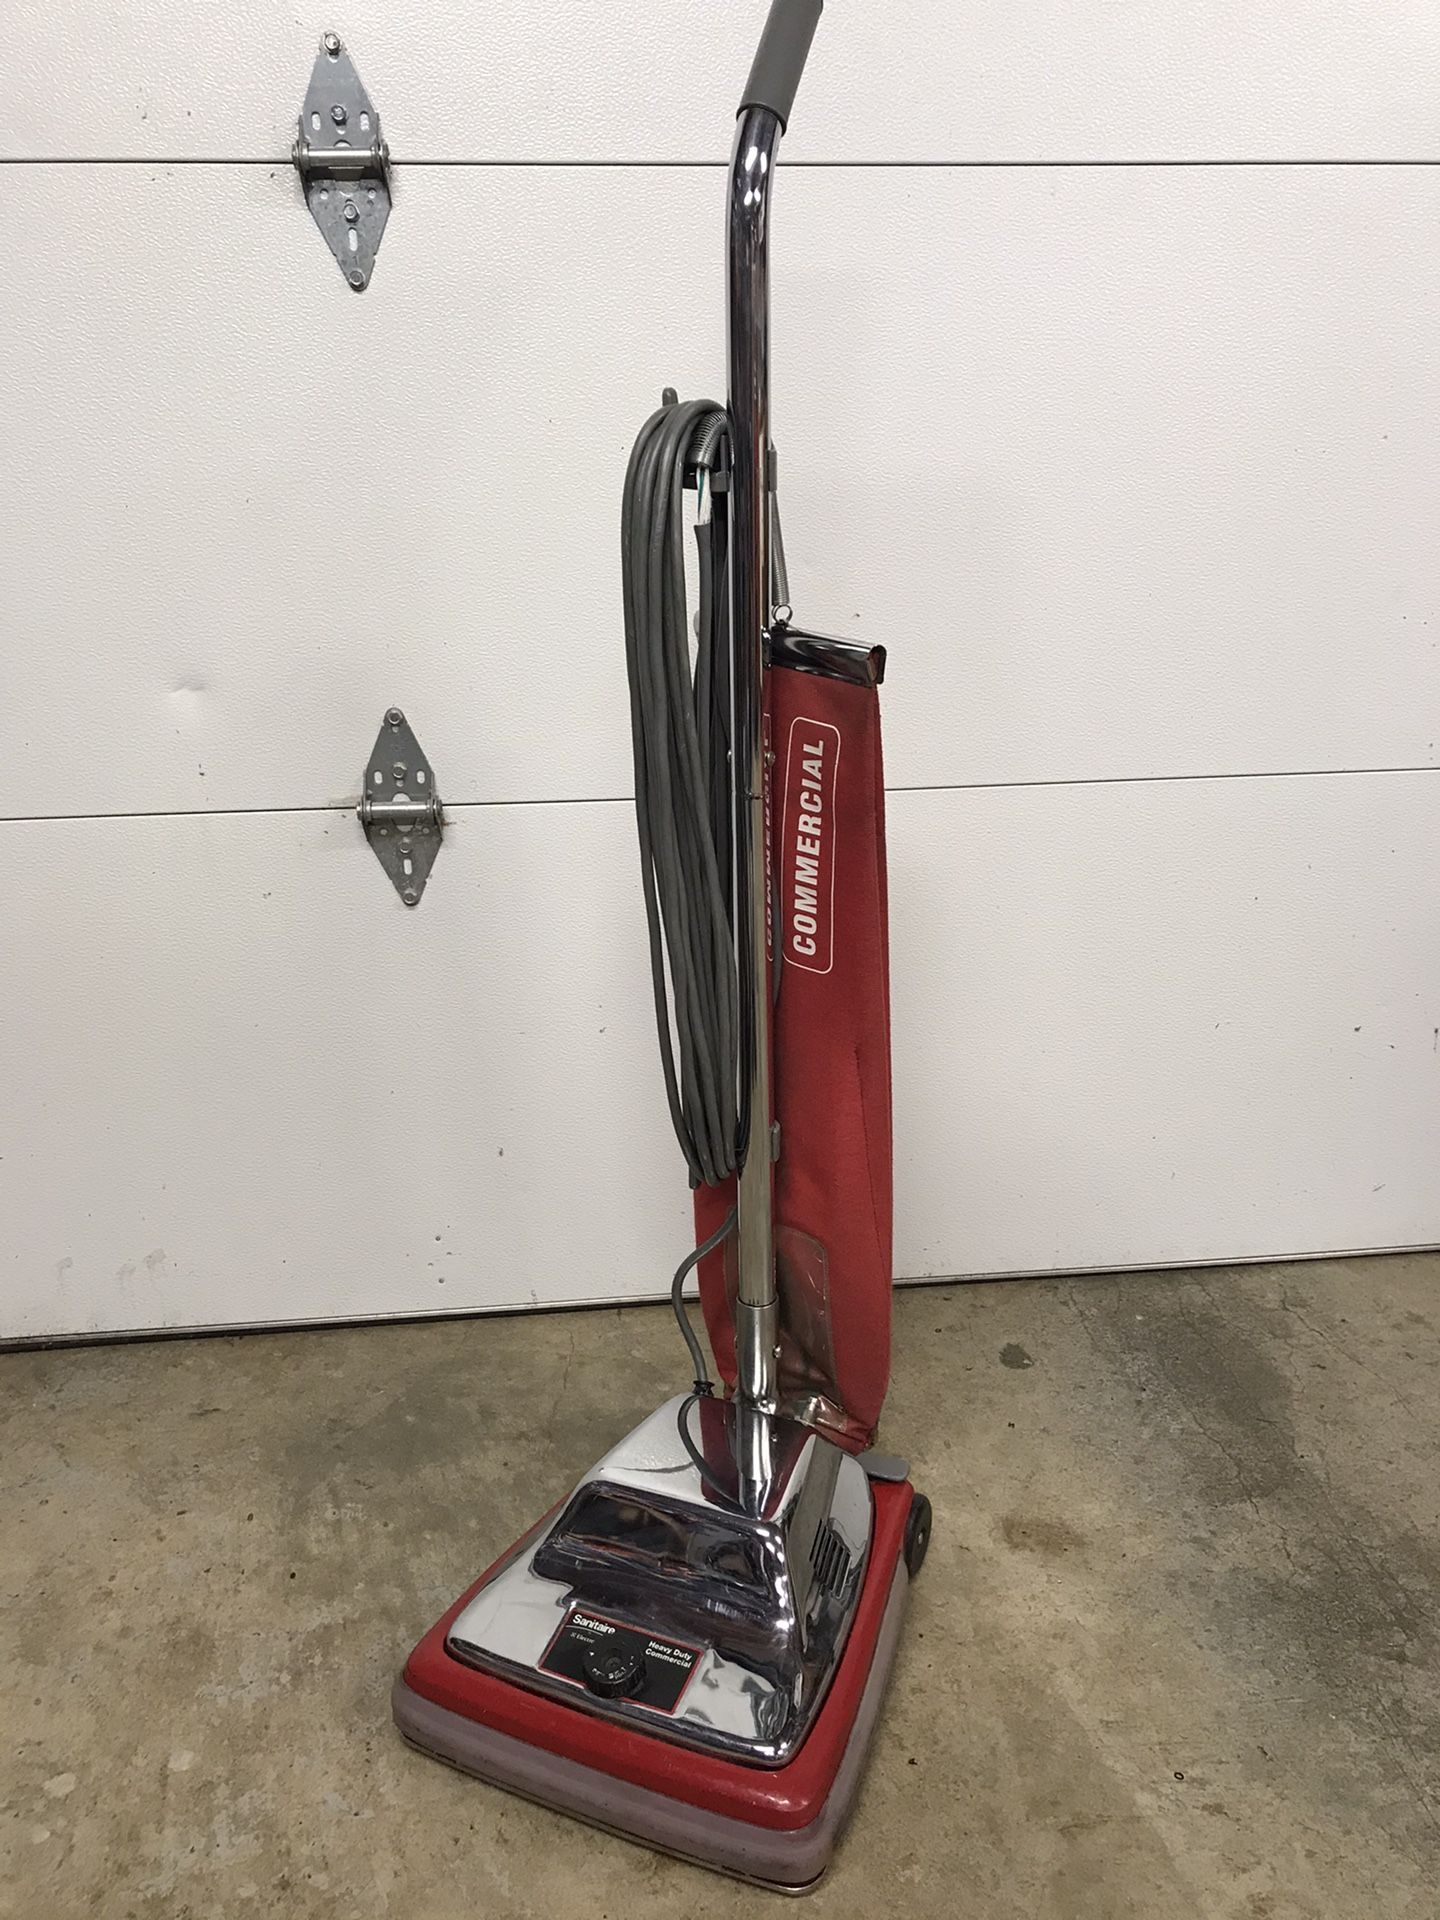 Sanitaire by Electrolux commercial grade vacuum cleaner